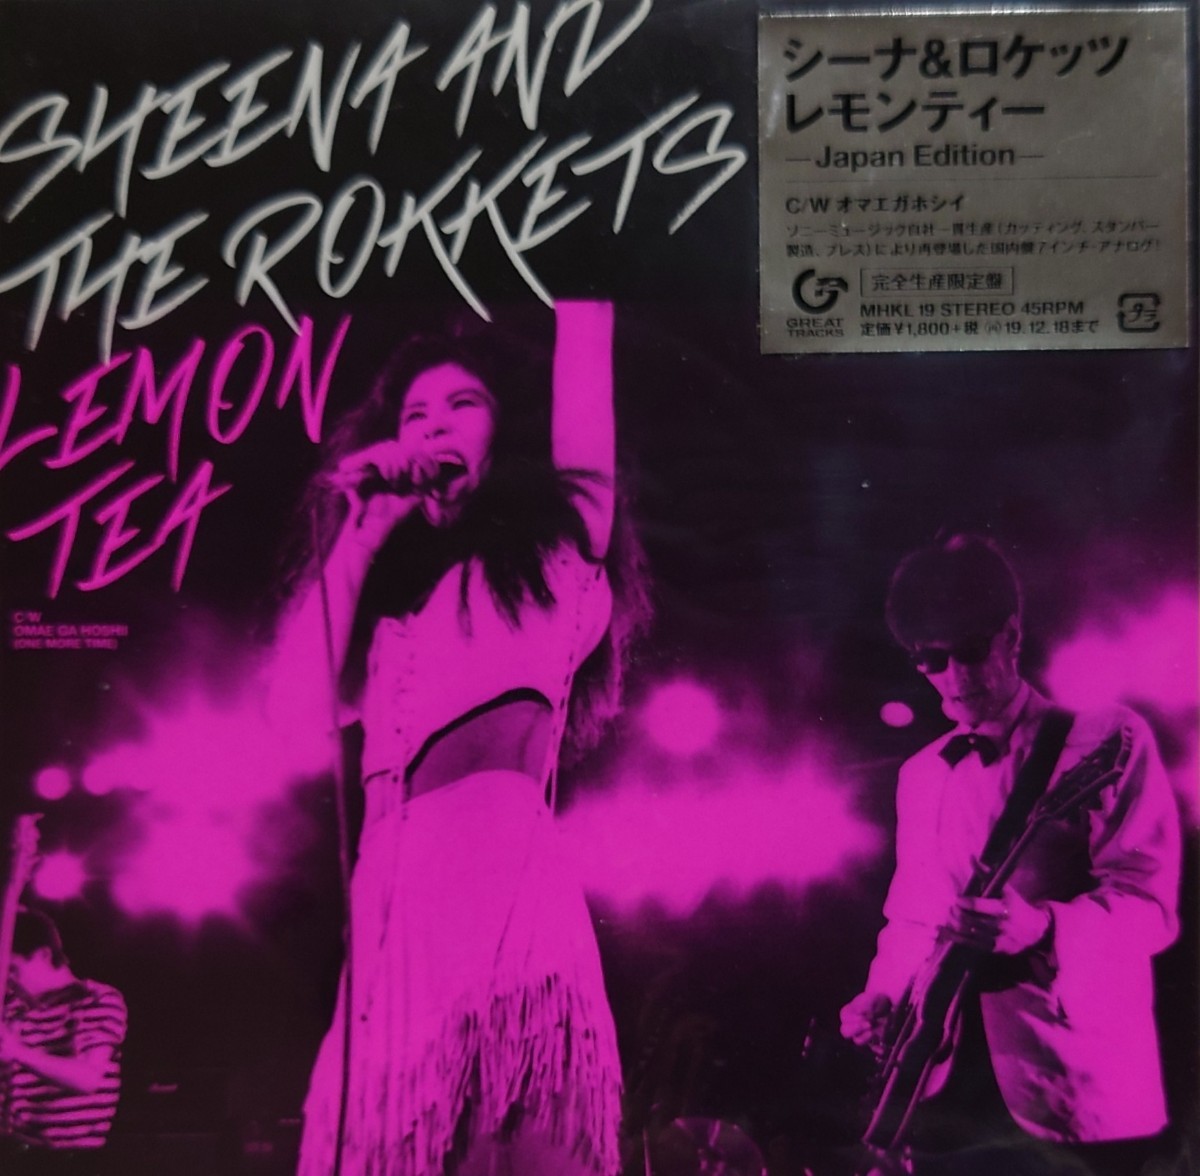 si-na& The *roketsu* new goods 7 -inch record * lemon tea *Japan Edition( complete production limitation record Second Press )